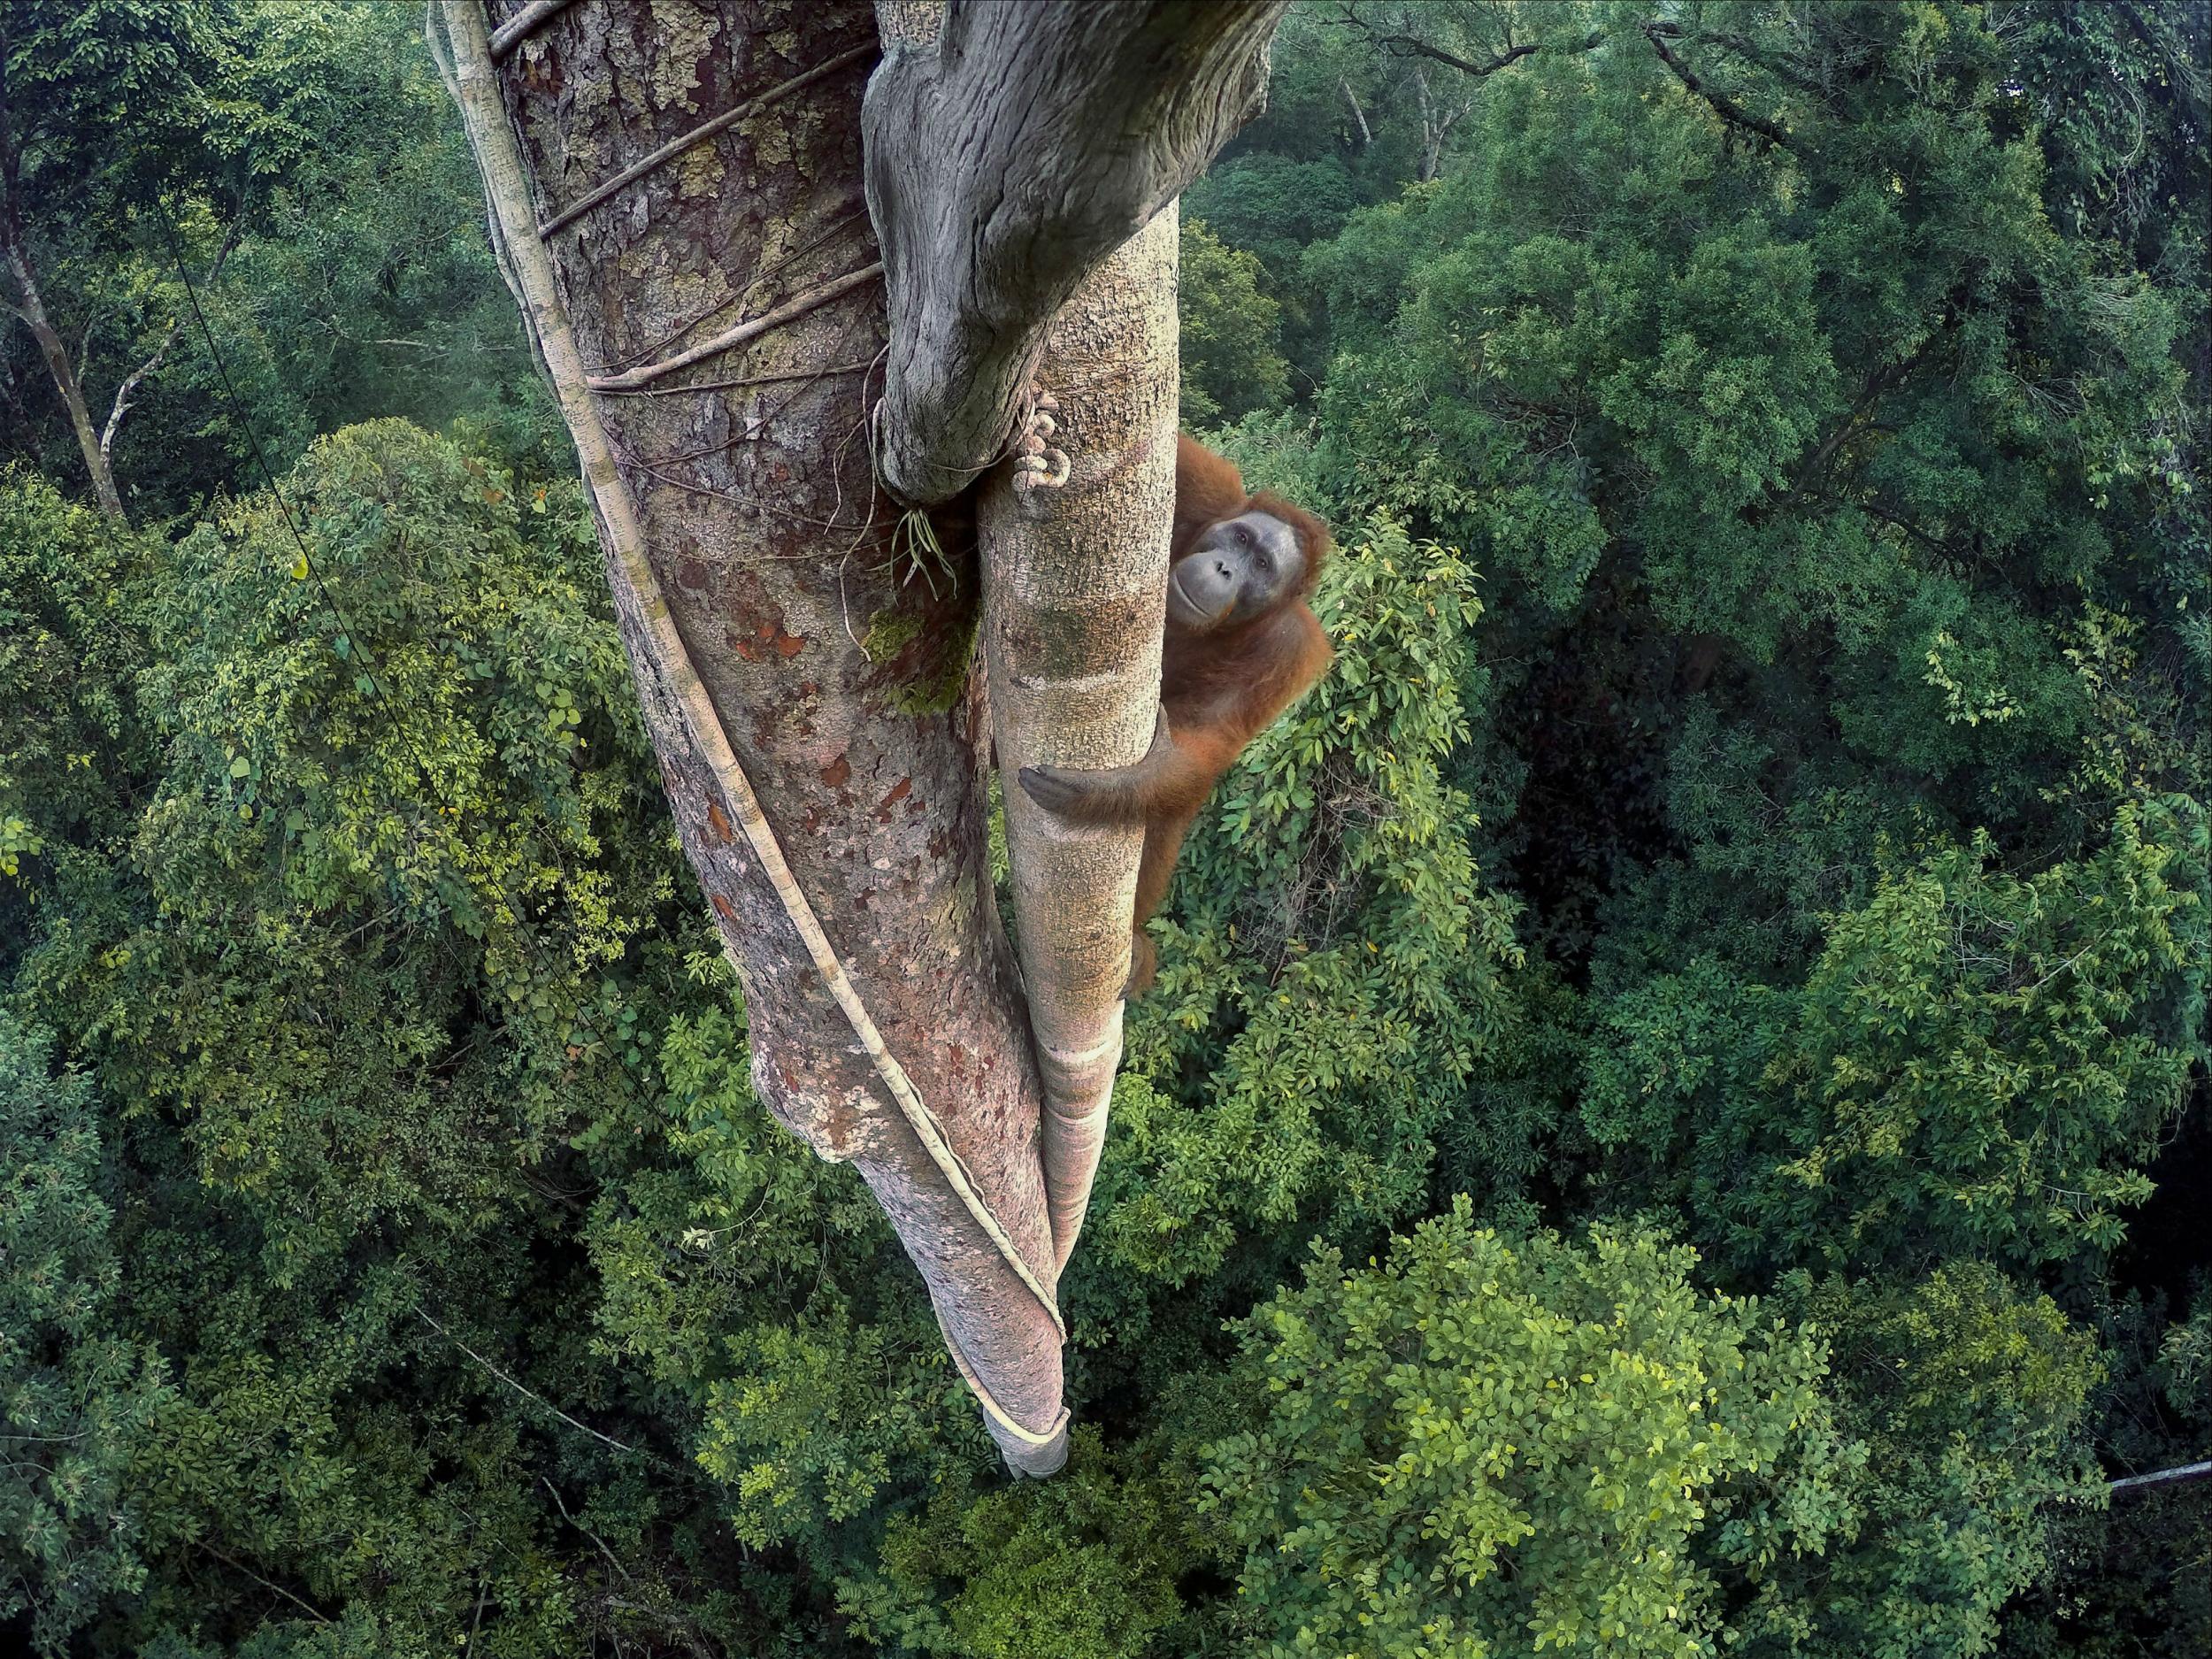 'Entwined lives' by Tim Laman (USA) - Winner, Wildlife Photographer of the Year 2016